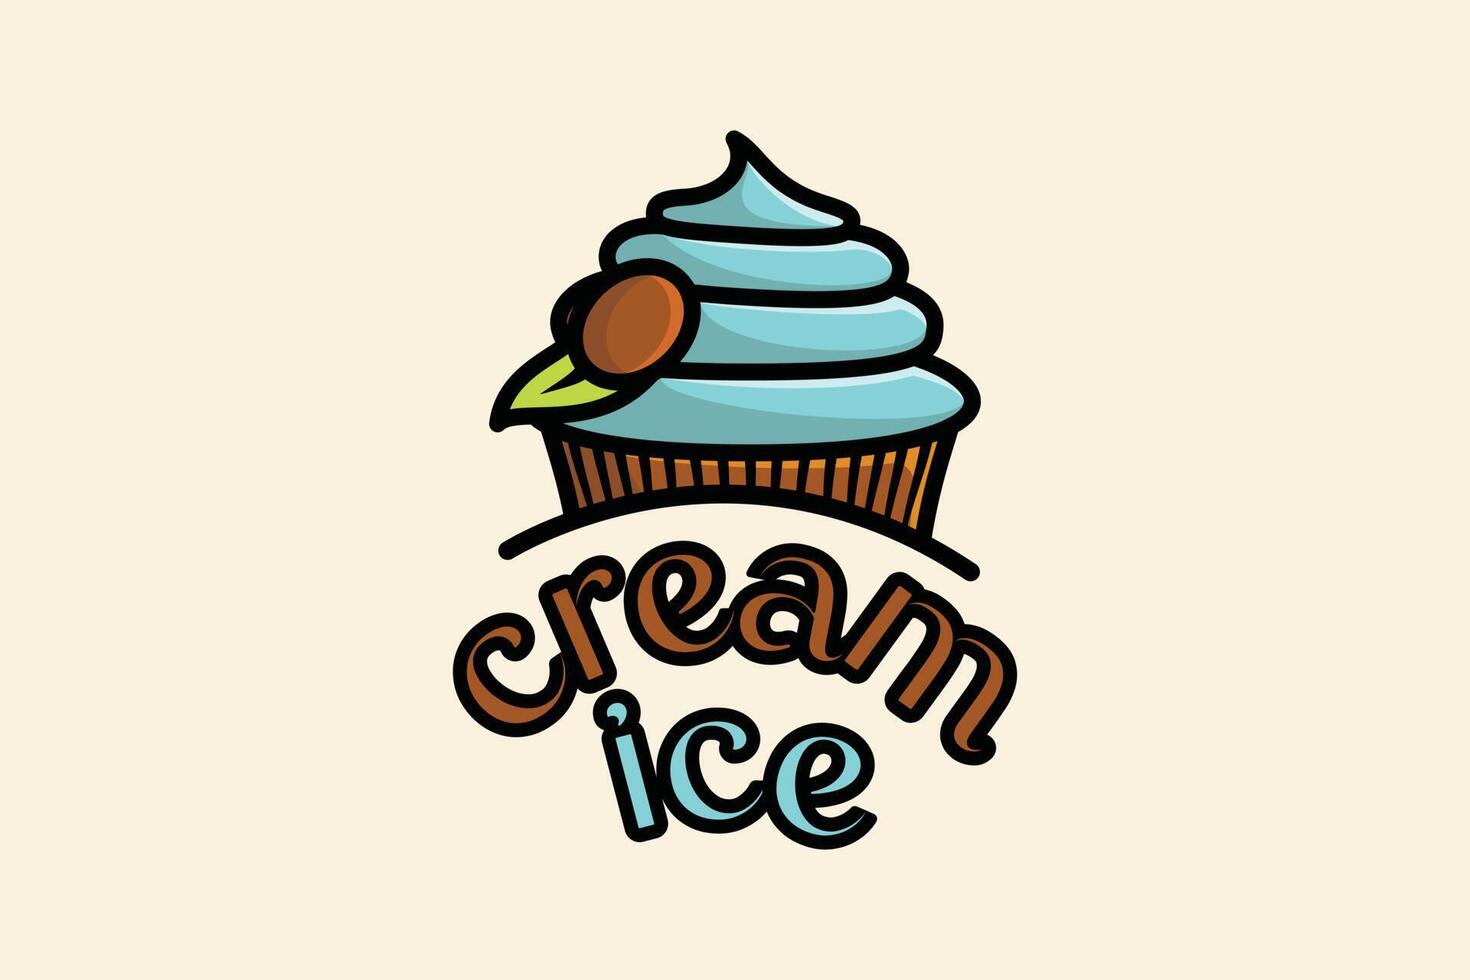 Summer Ice Cream Cup vector illustration. Summer food and ice cream object icon concept. Ice cream paper cup vector design with shadow. Summer Ice Cream combo icon logo design.